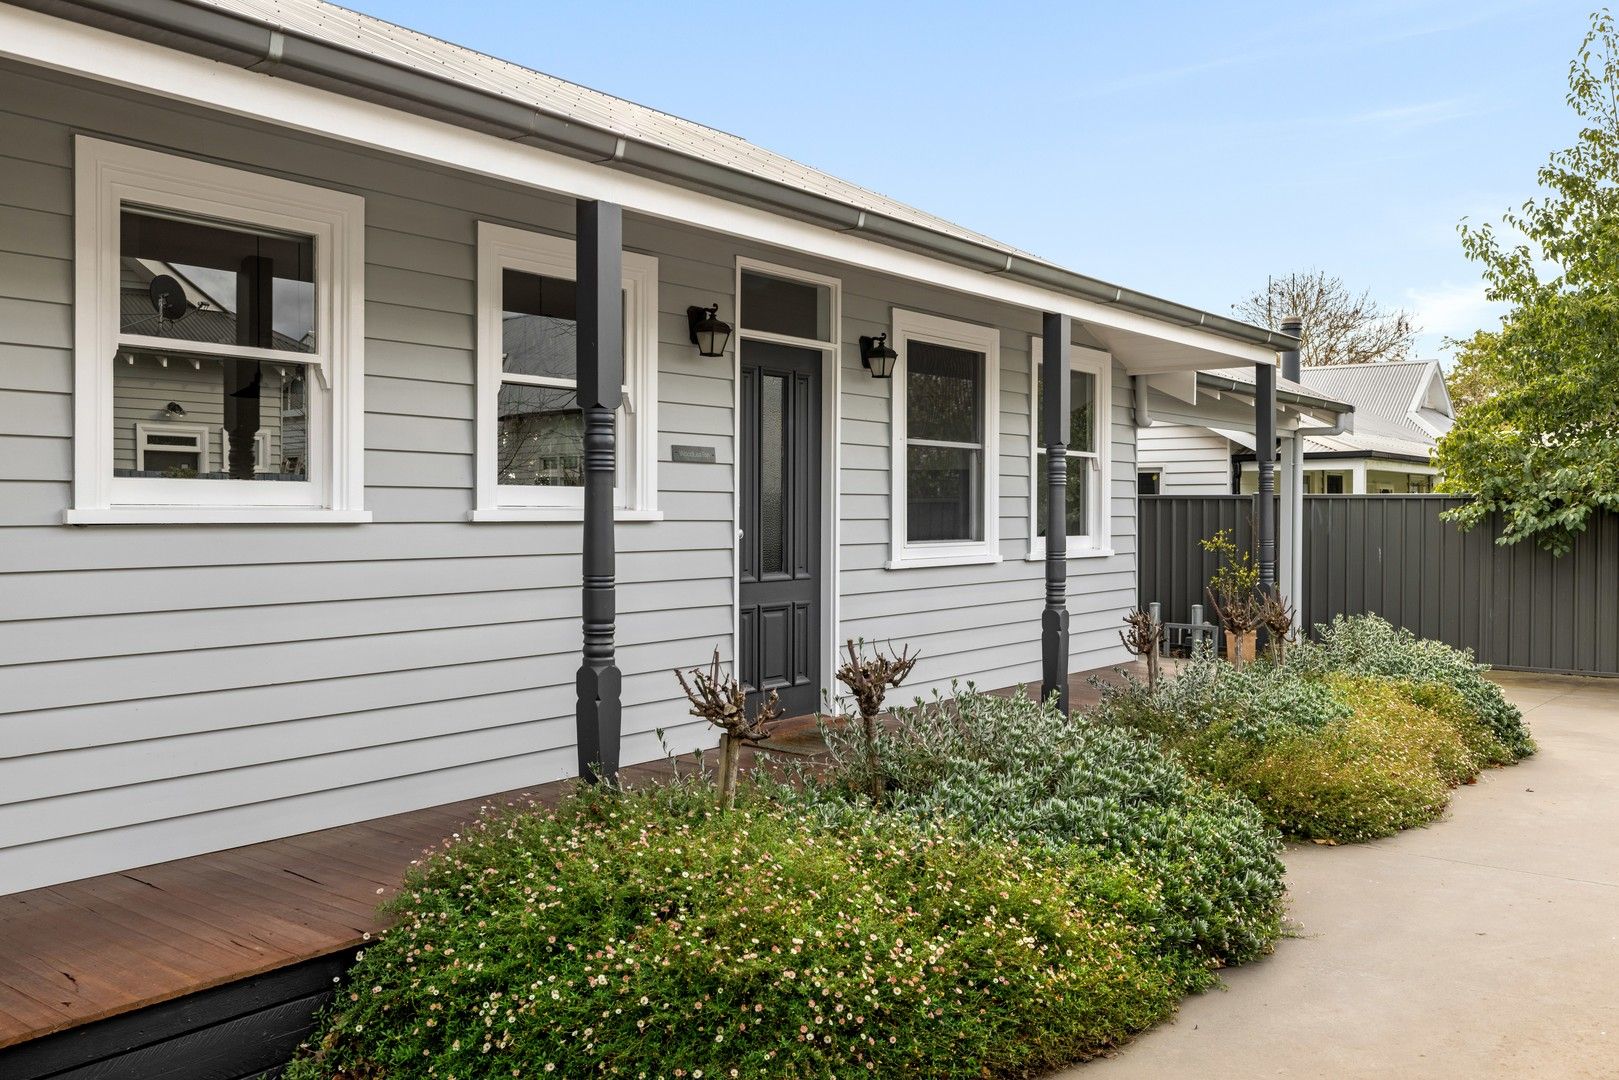 2 bedrooms House in 2/13 Jeffreys Street WOODEND VIC, 3442